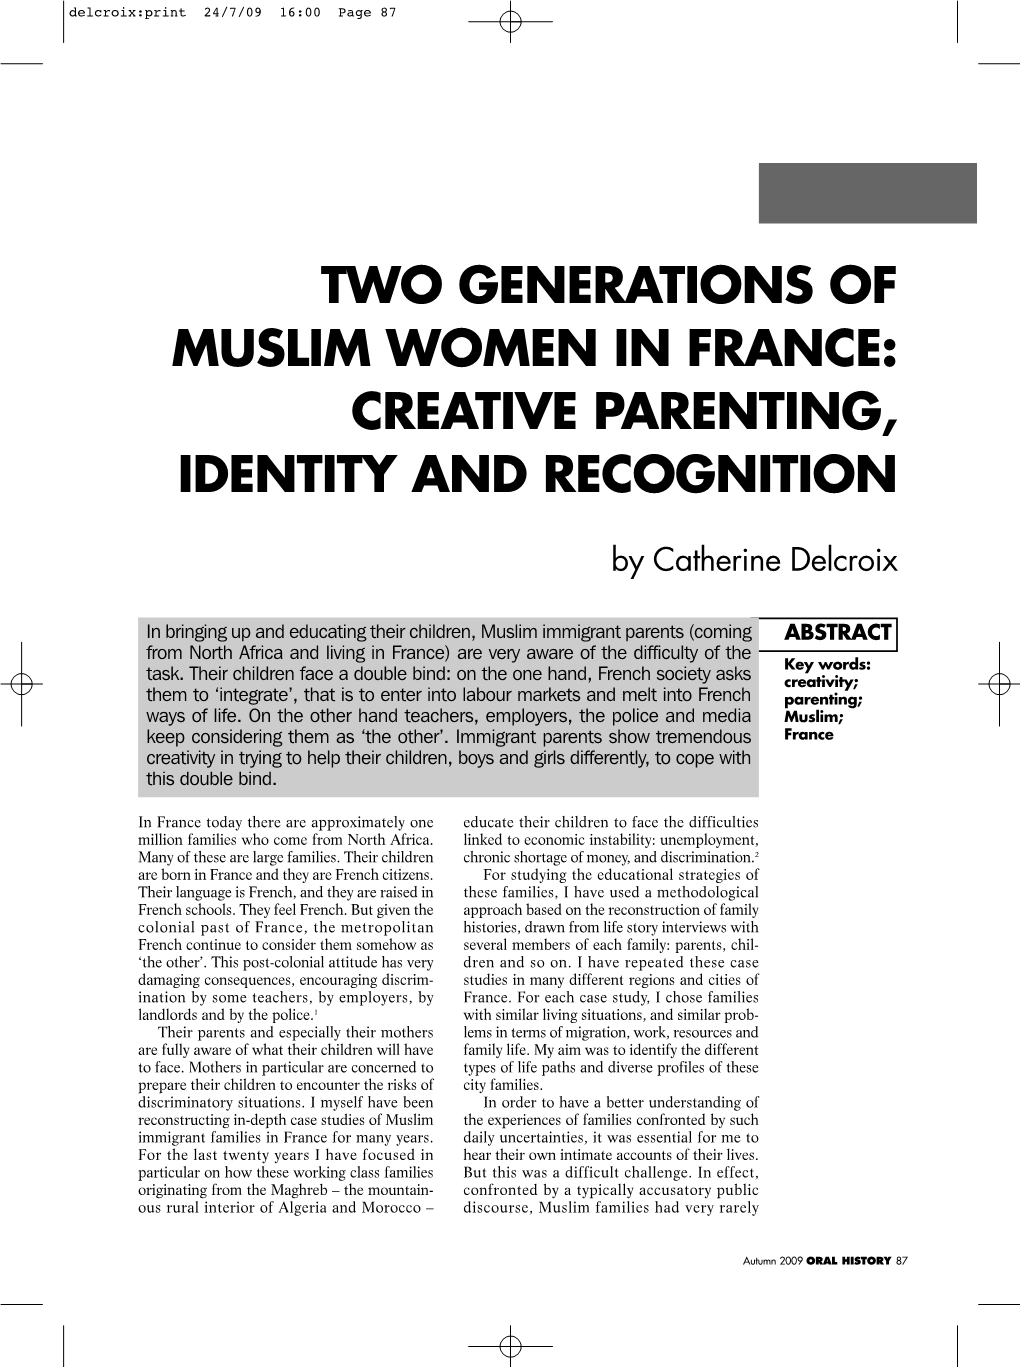 Two Generations of Muslim Women in France: Creative Parenting, Identity and Recognition